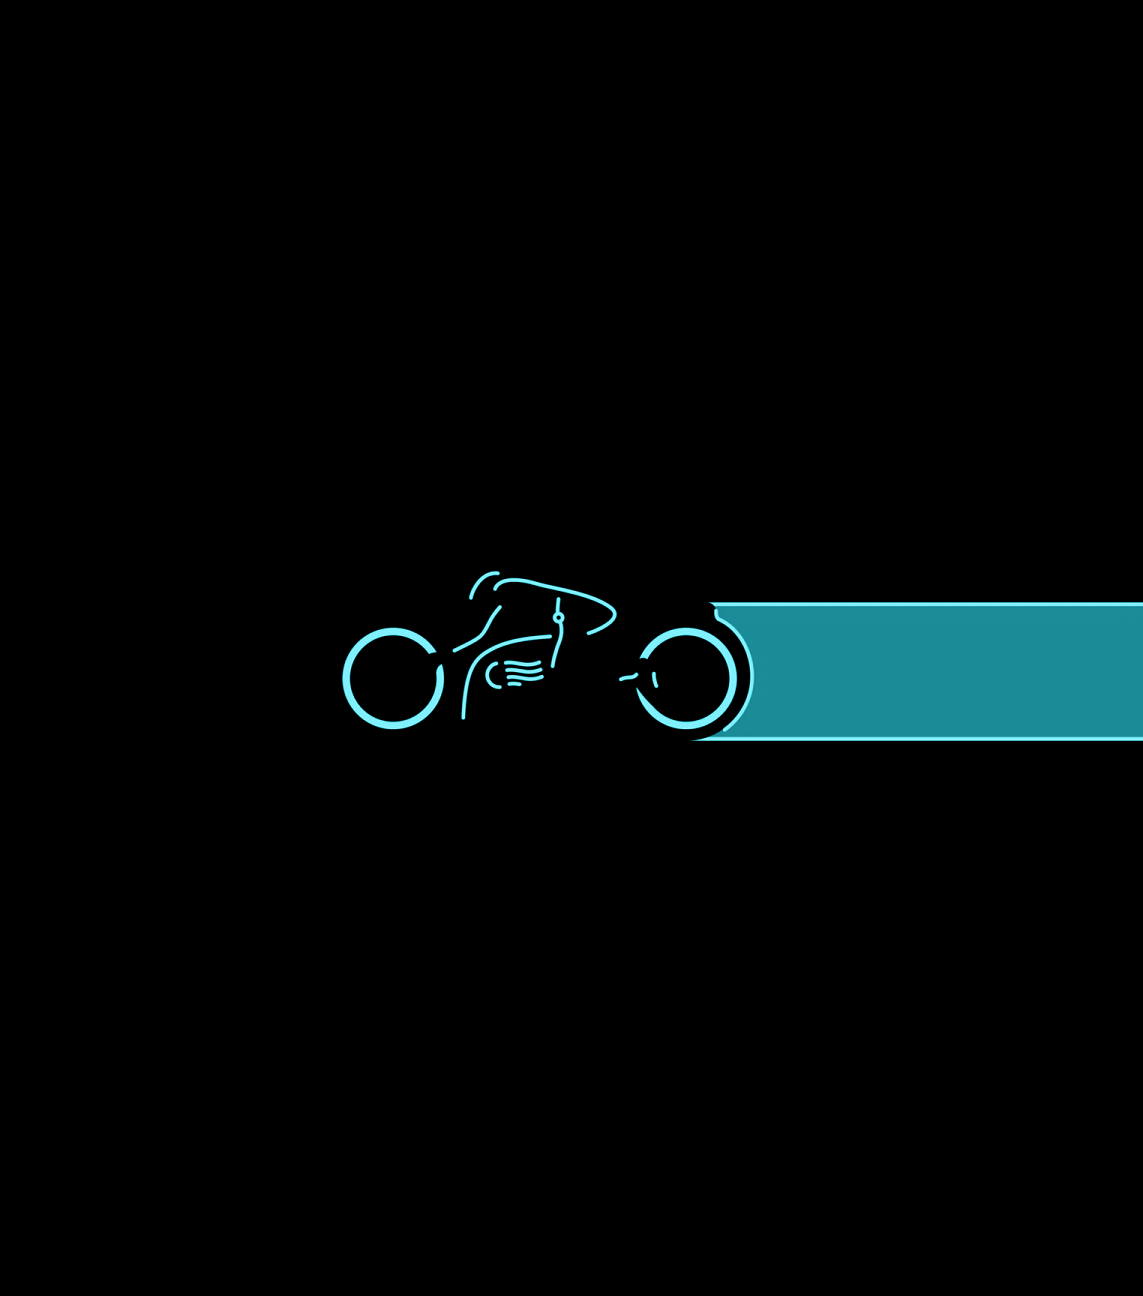 tron is a franchise that was made for dark themes darkness 9100 hd wallpaper backgrounds download